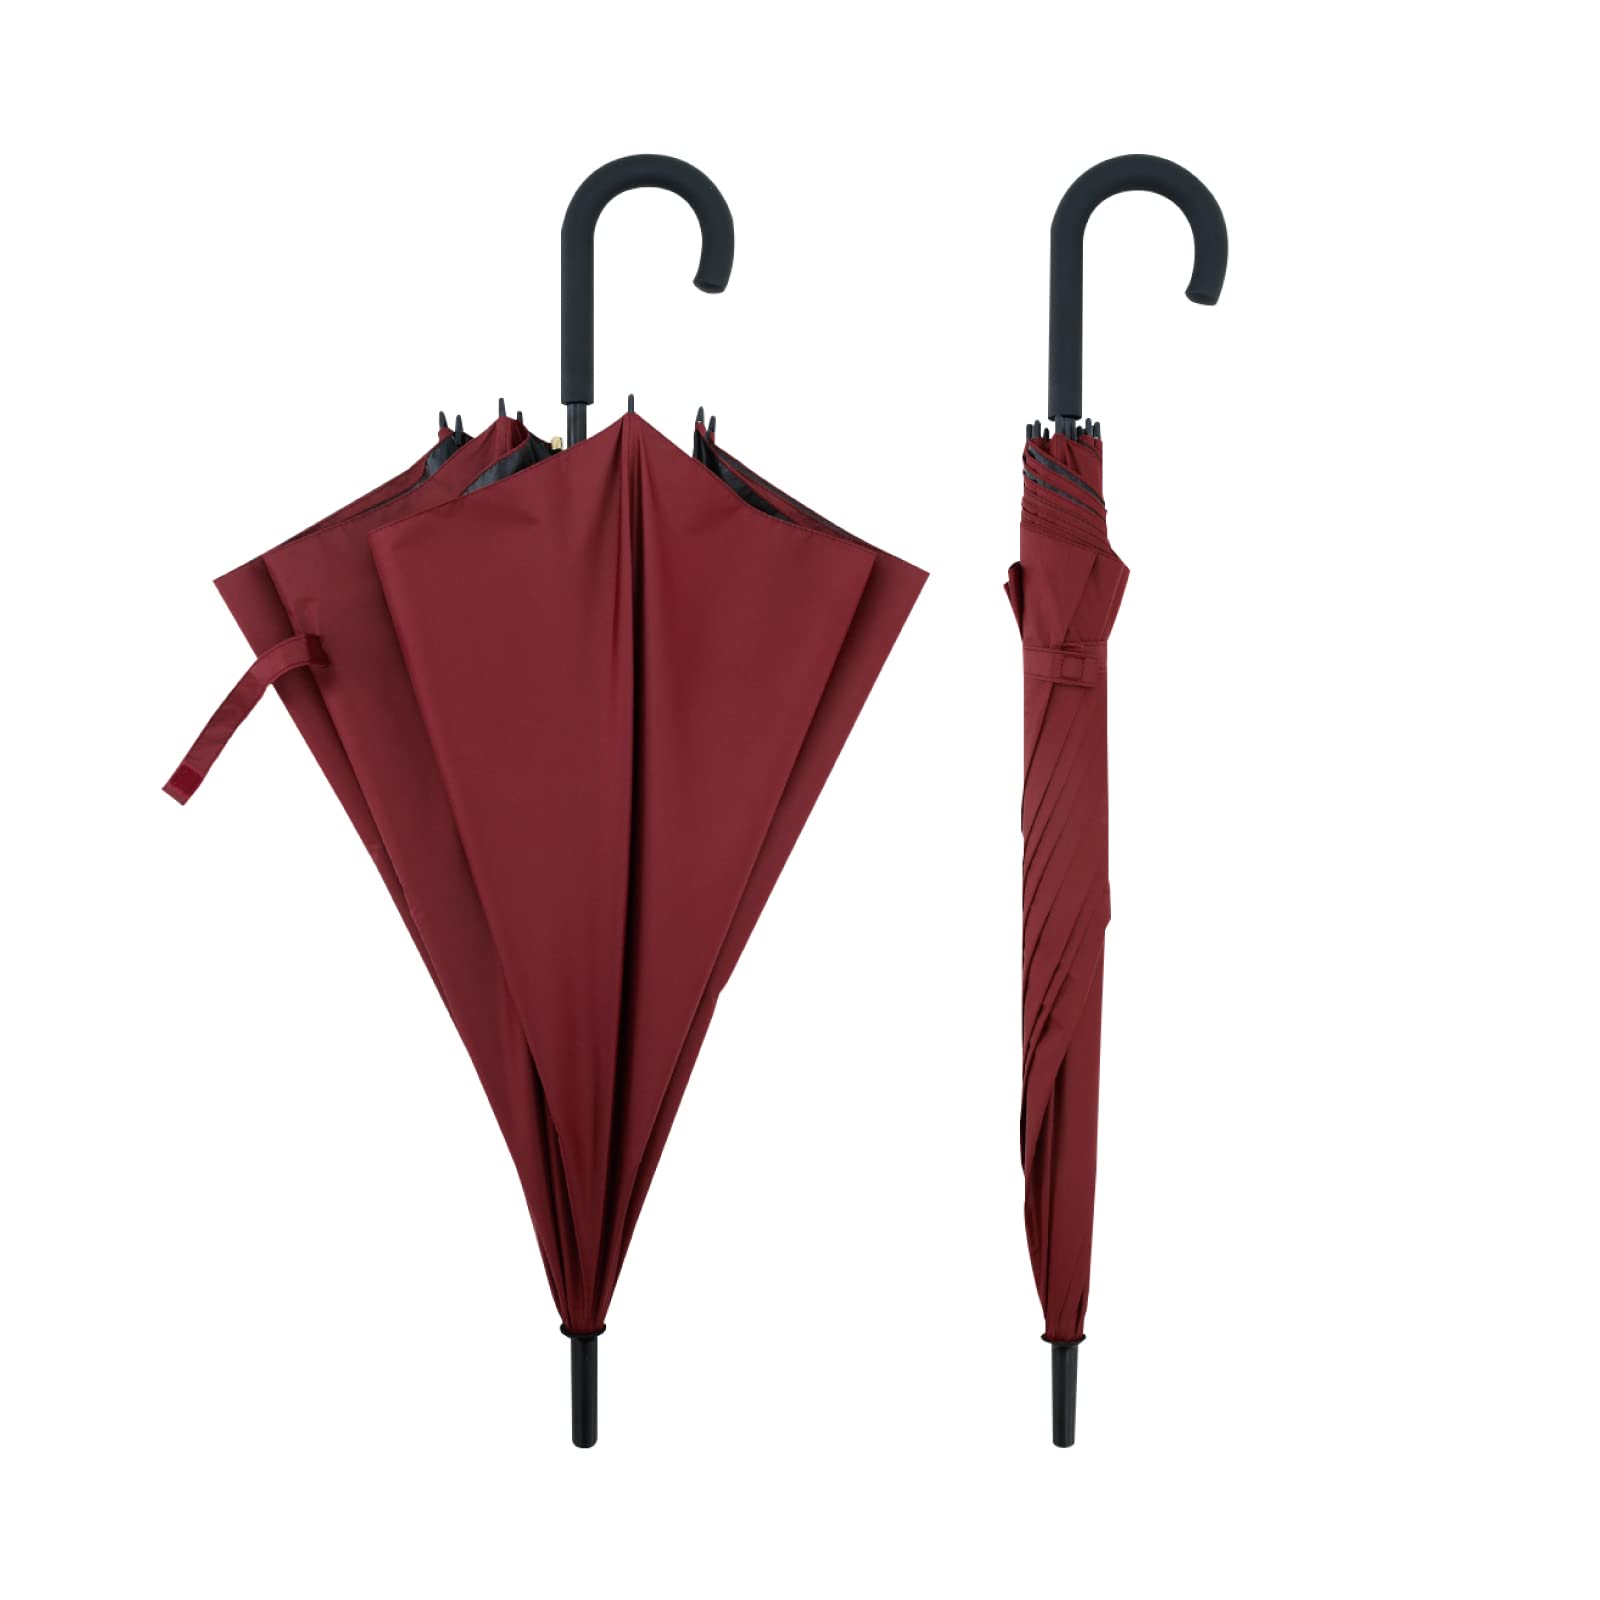 ABSORBIA Big Straight and Stick Umbrella for rain, Windproof, Waterproof and UV Coated, Open Diameter 105cm Double Layer Umbrella in Red Colour